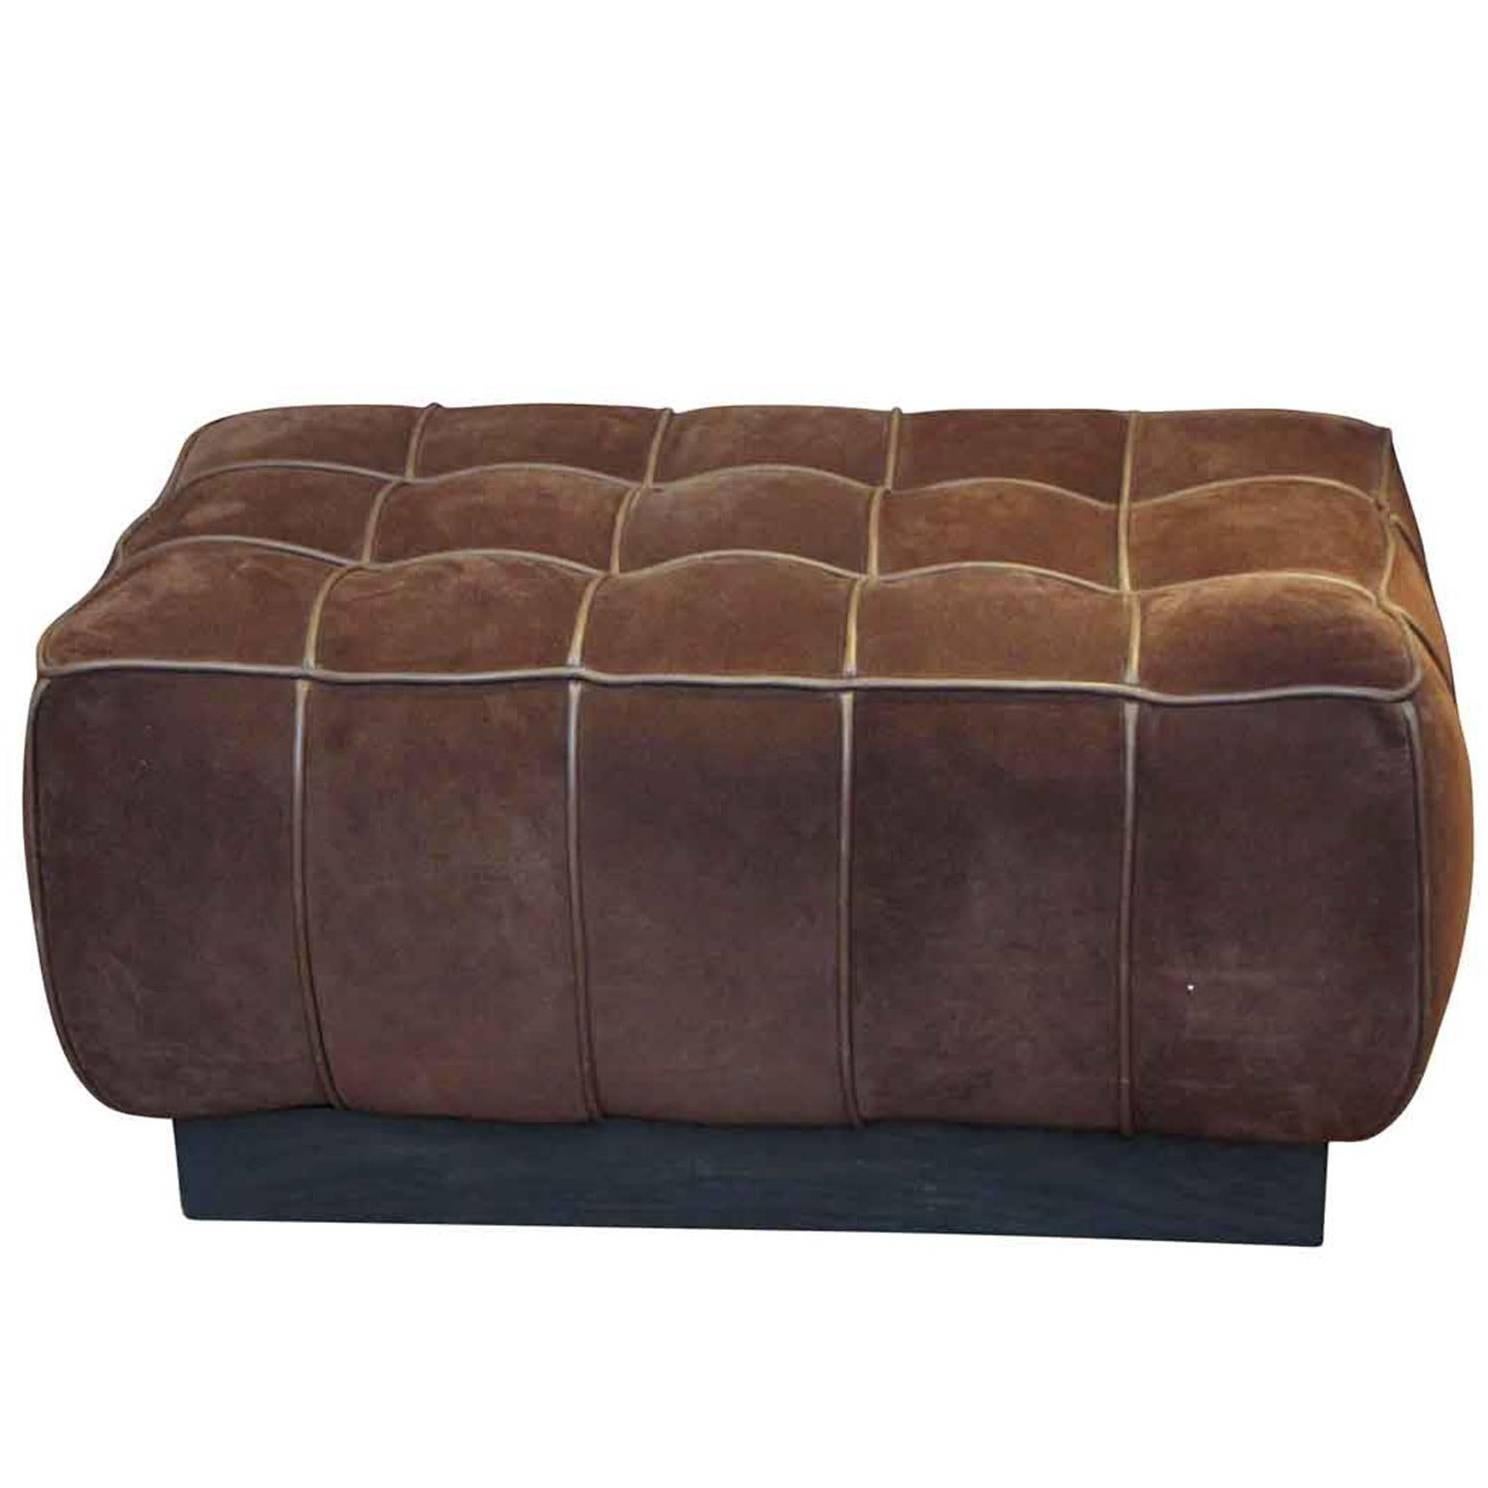 1990s Warm Brown Suede Leather Ottoman with a Wooden Base and a Leather Handle